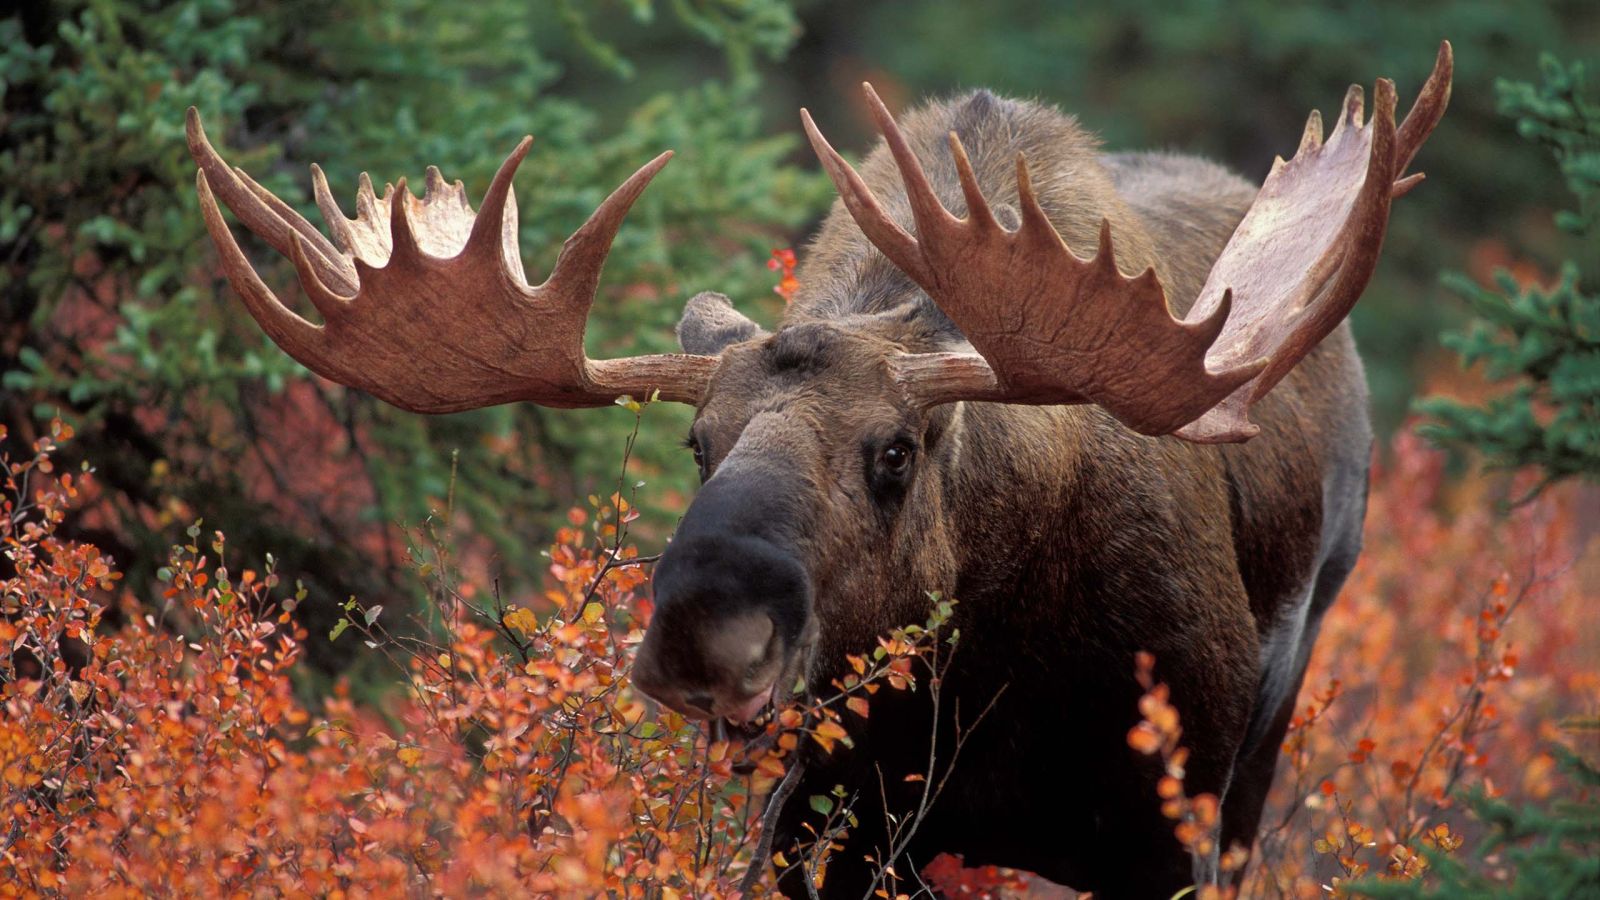 Ken Kapling Photo of moose grazing in the forest